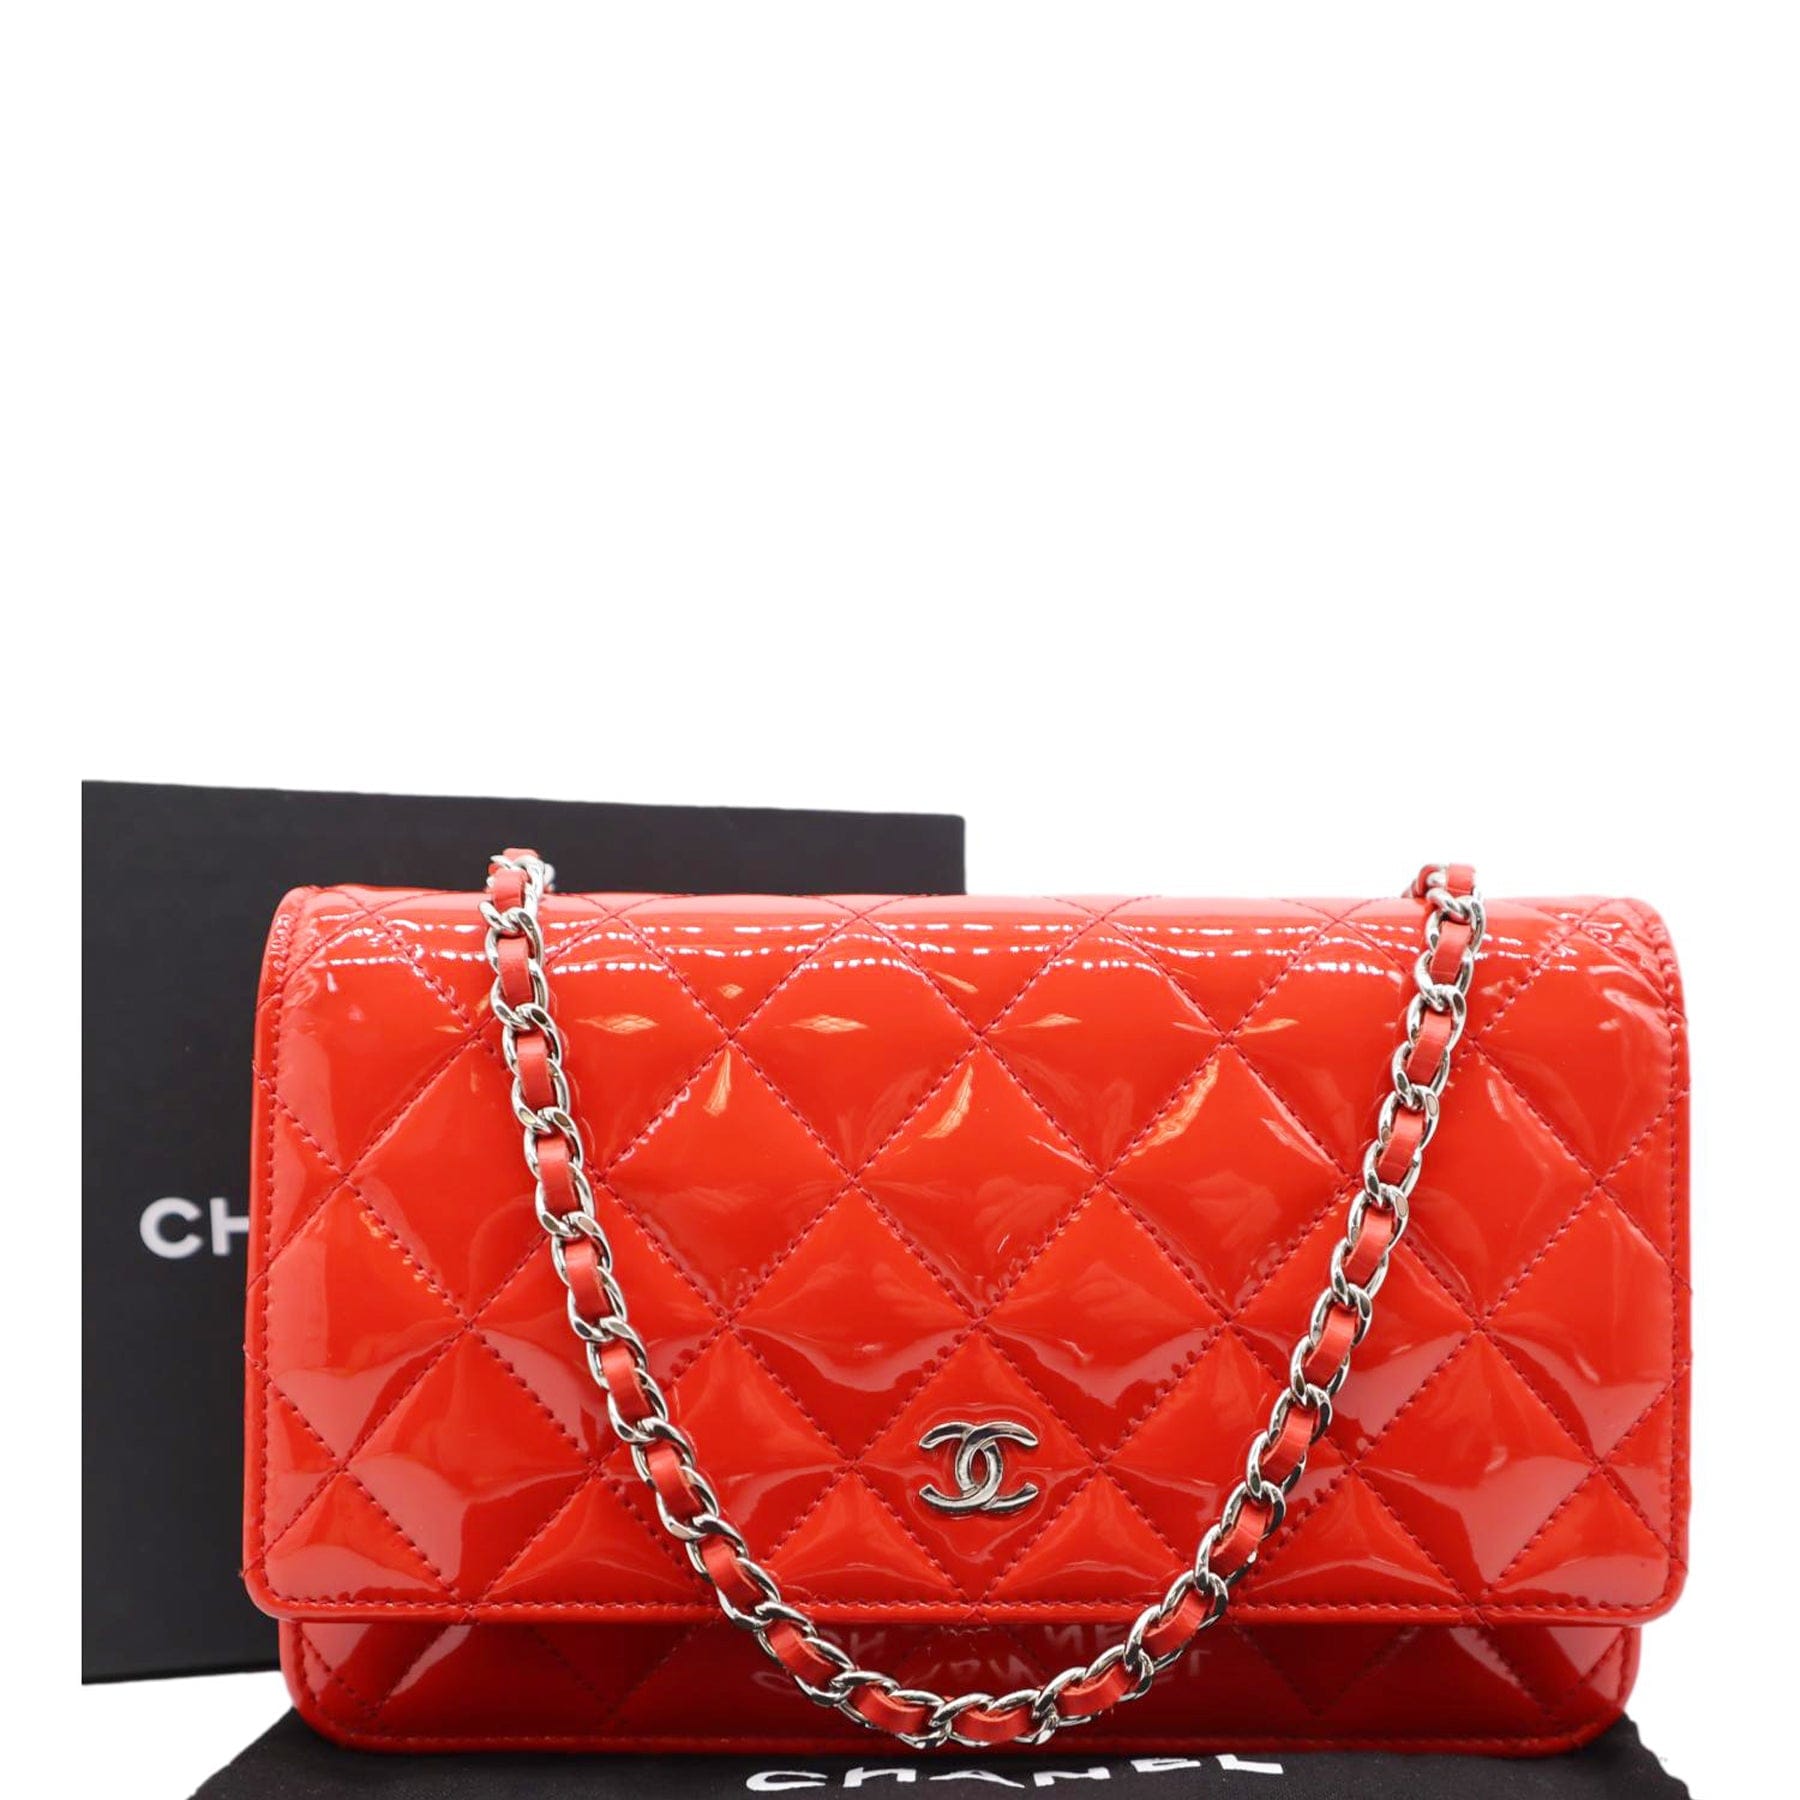 Chanel Wallet On Chain - 118 For Sale on 1stDibs  chanel wallet with chain,  chanel wallet on chain price in paris, chanel wallet on chain singapore